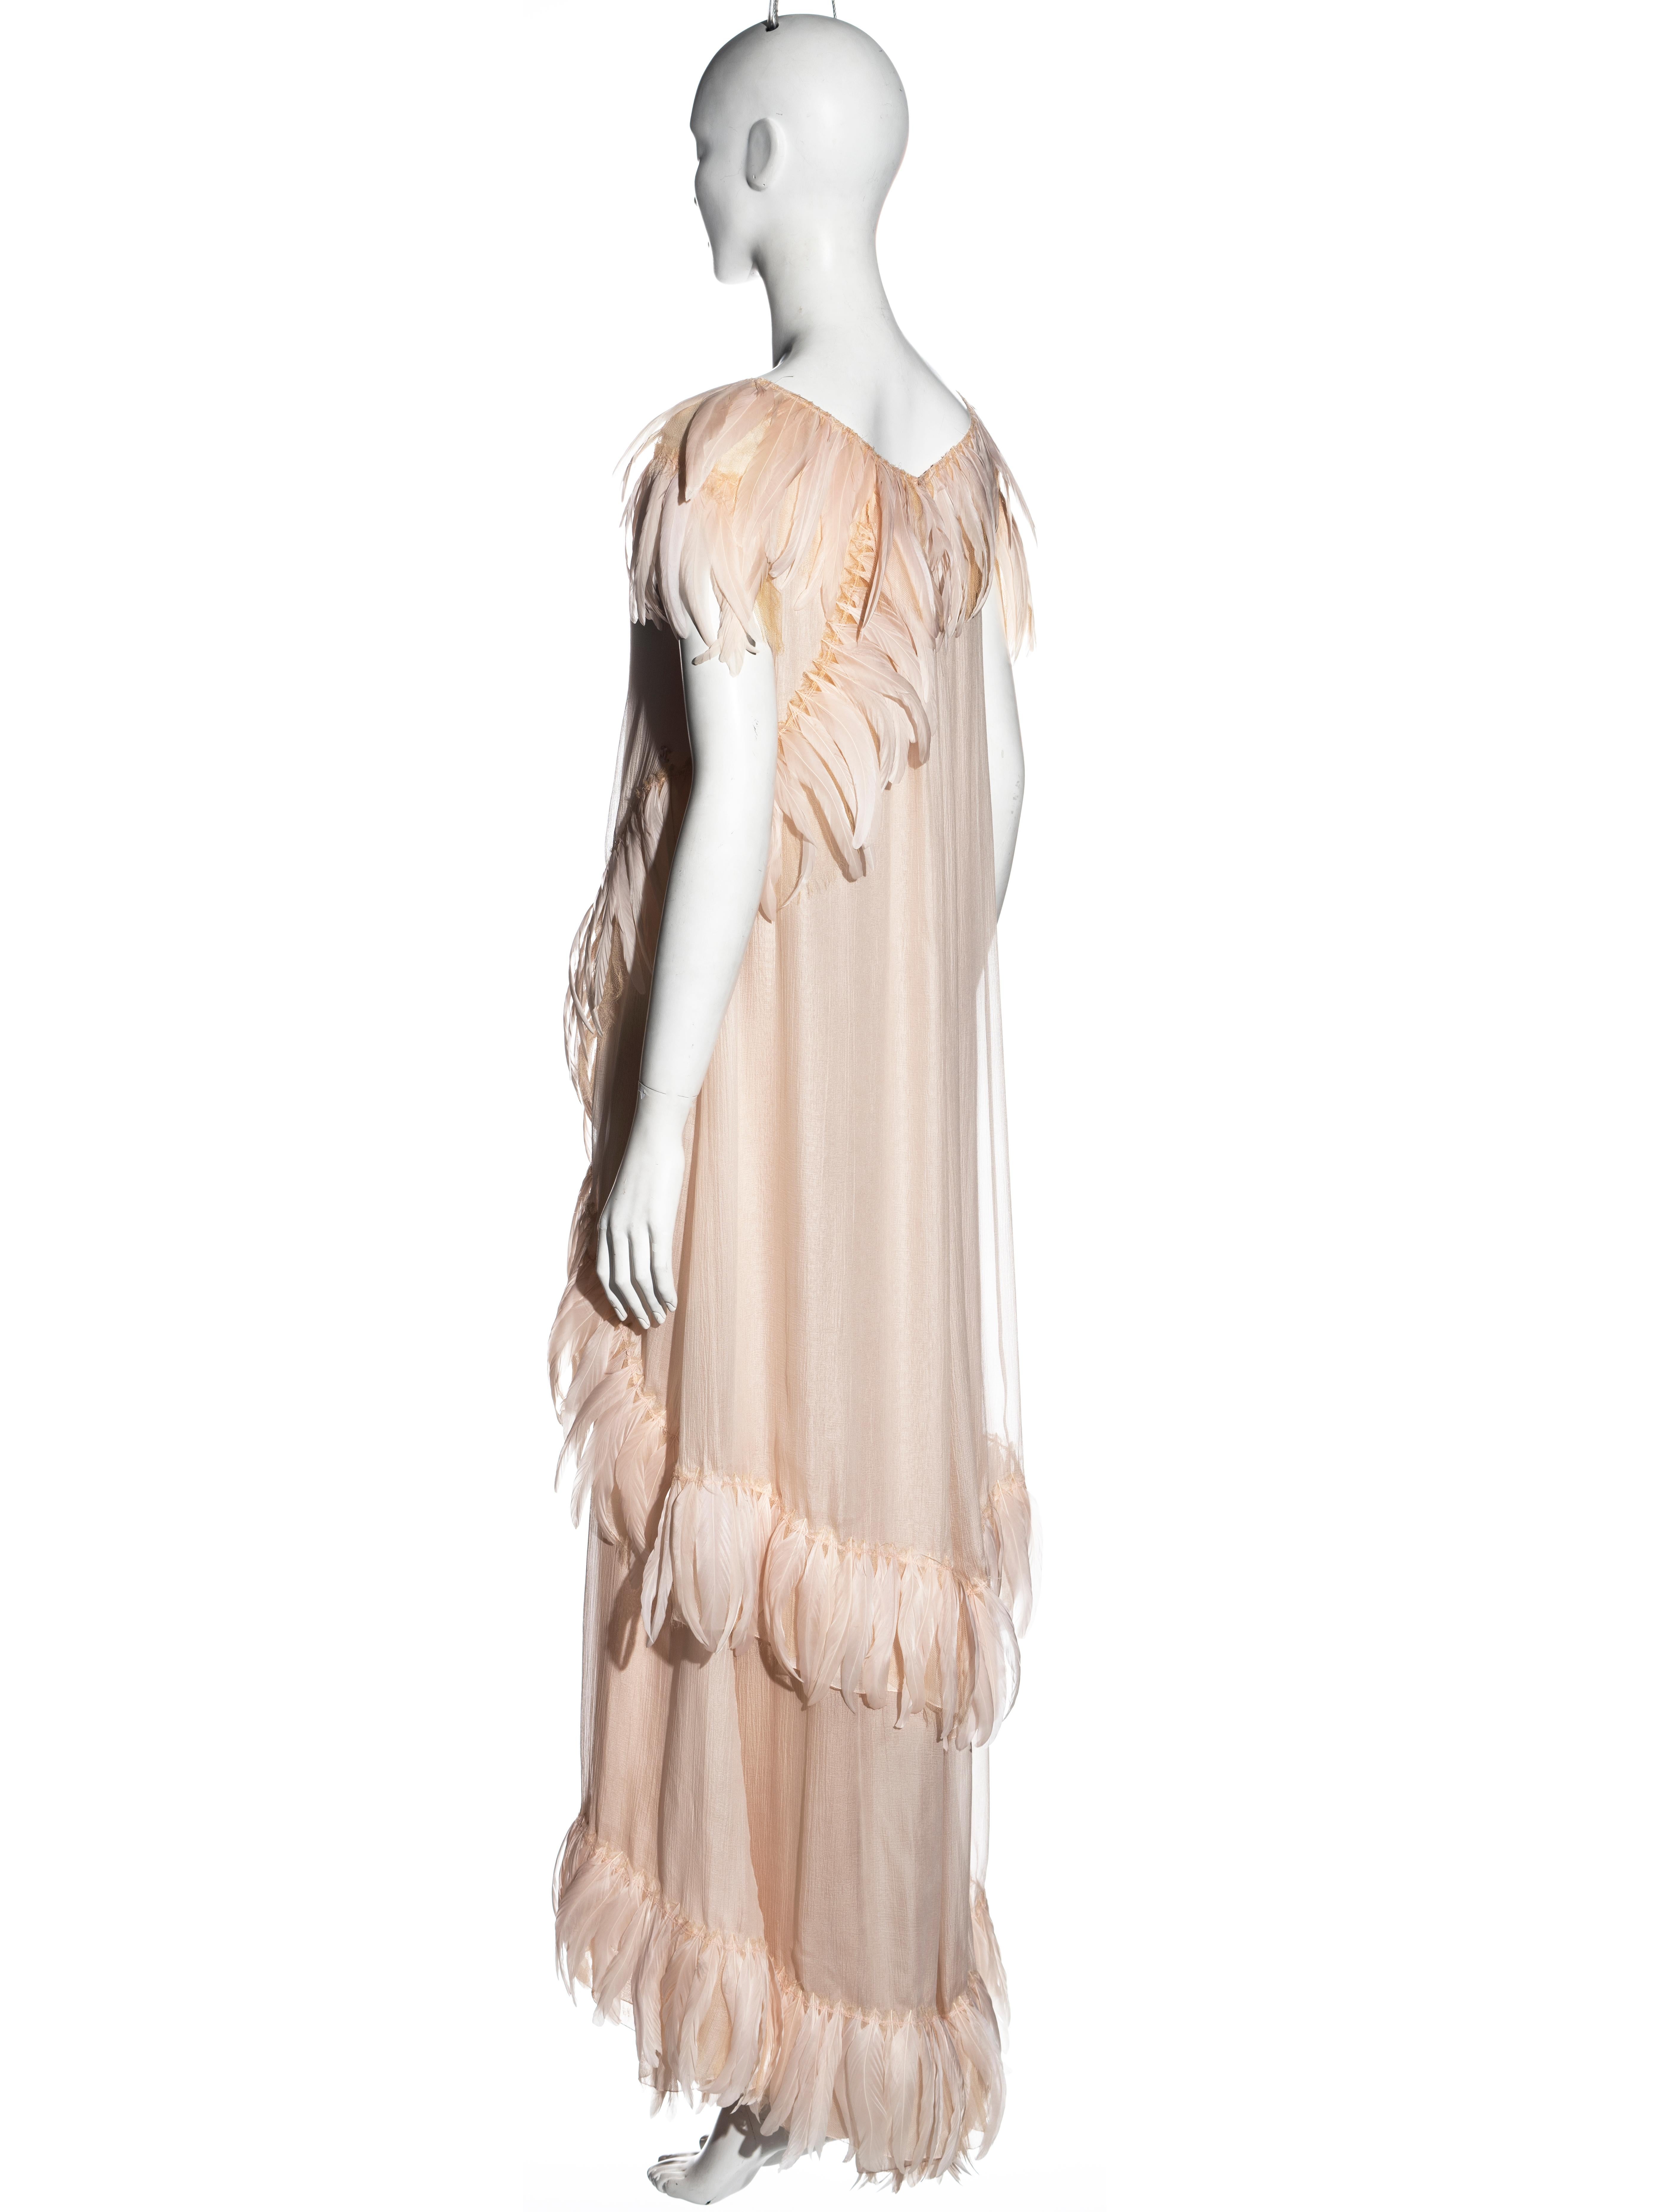 Chanel by Karl Lagerfeld silk chiffon evening dress with feathers, cr 2009 4